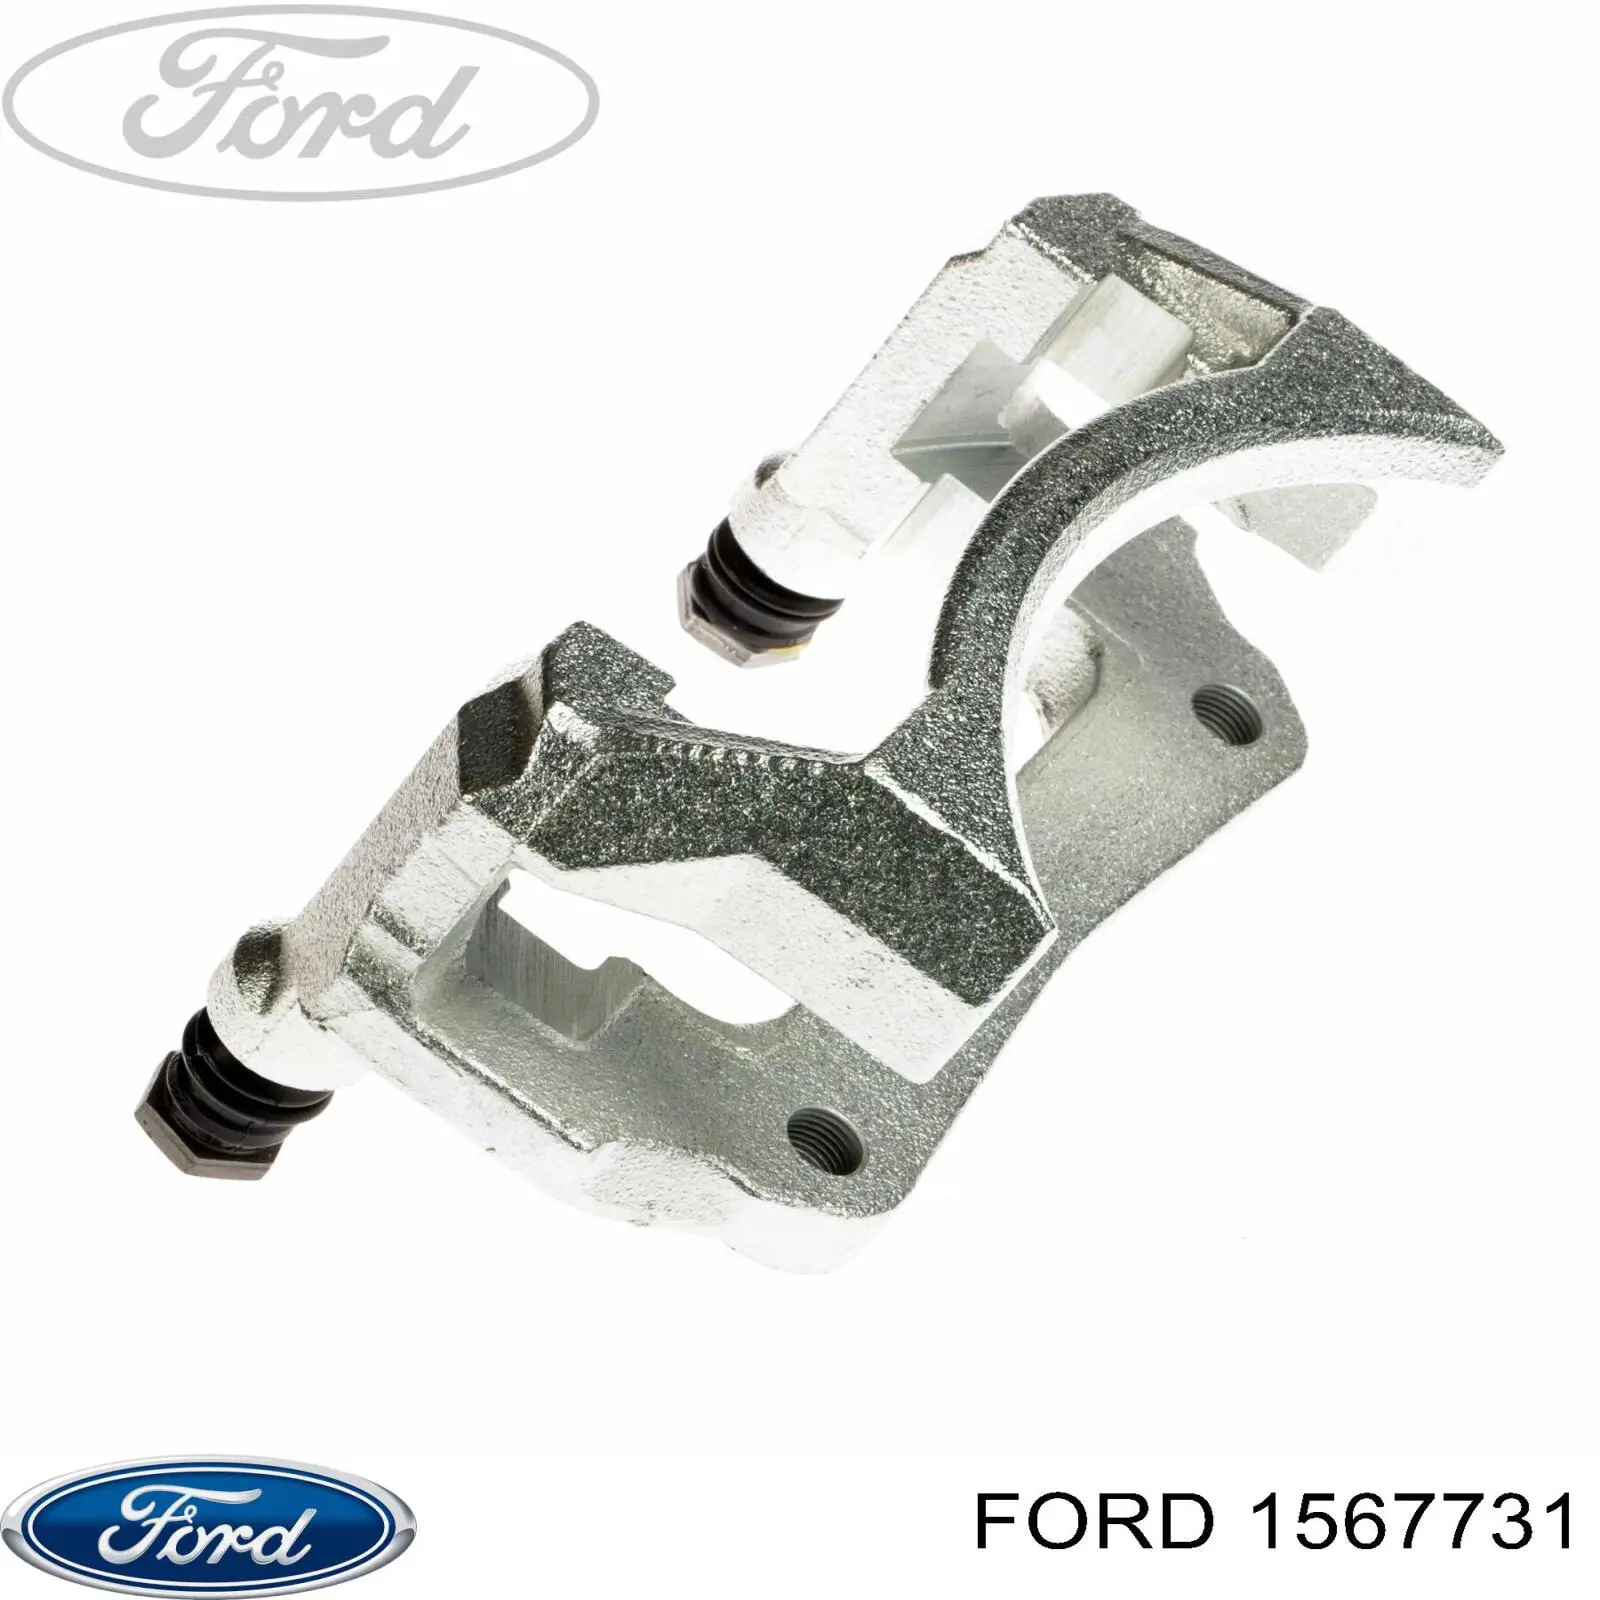 1883039 Ford 